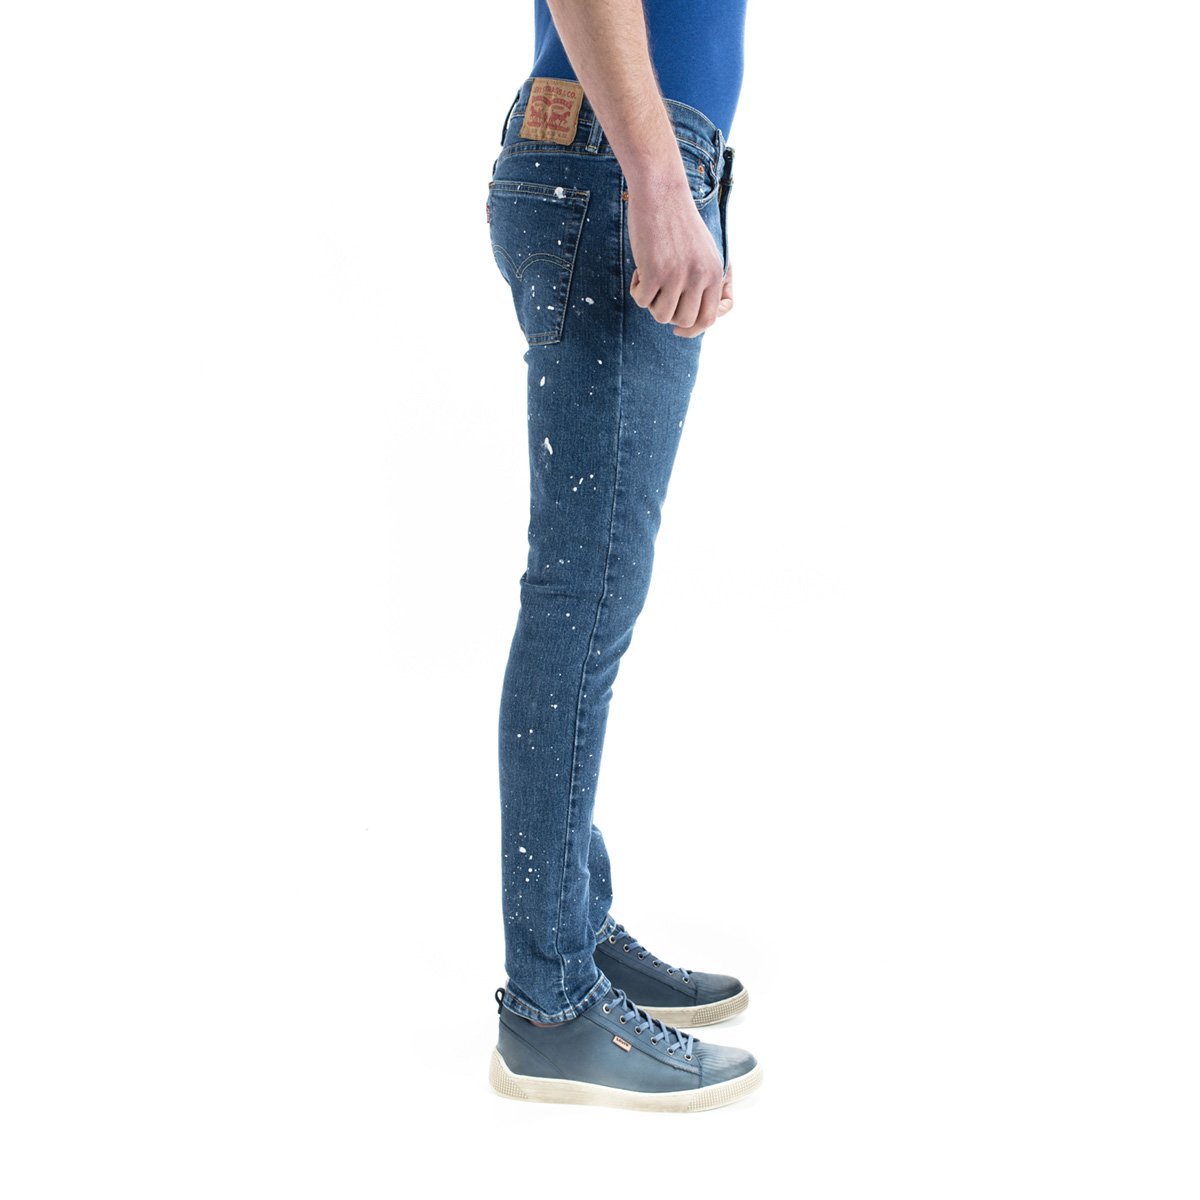 Jeans 510 &trade; Skinny Fit Levi's